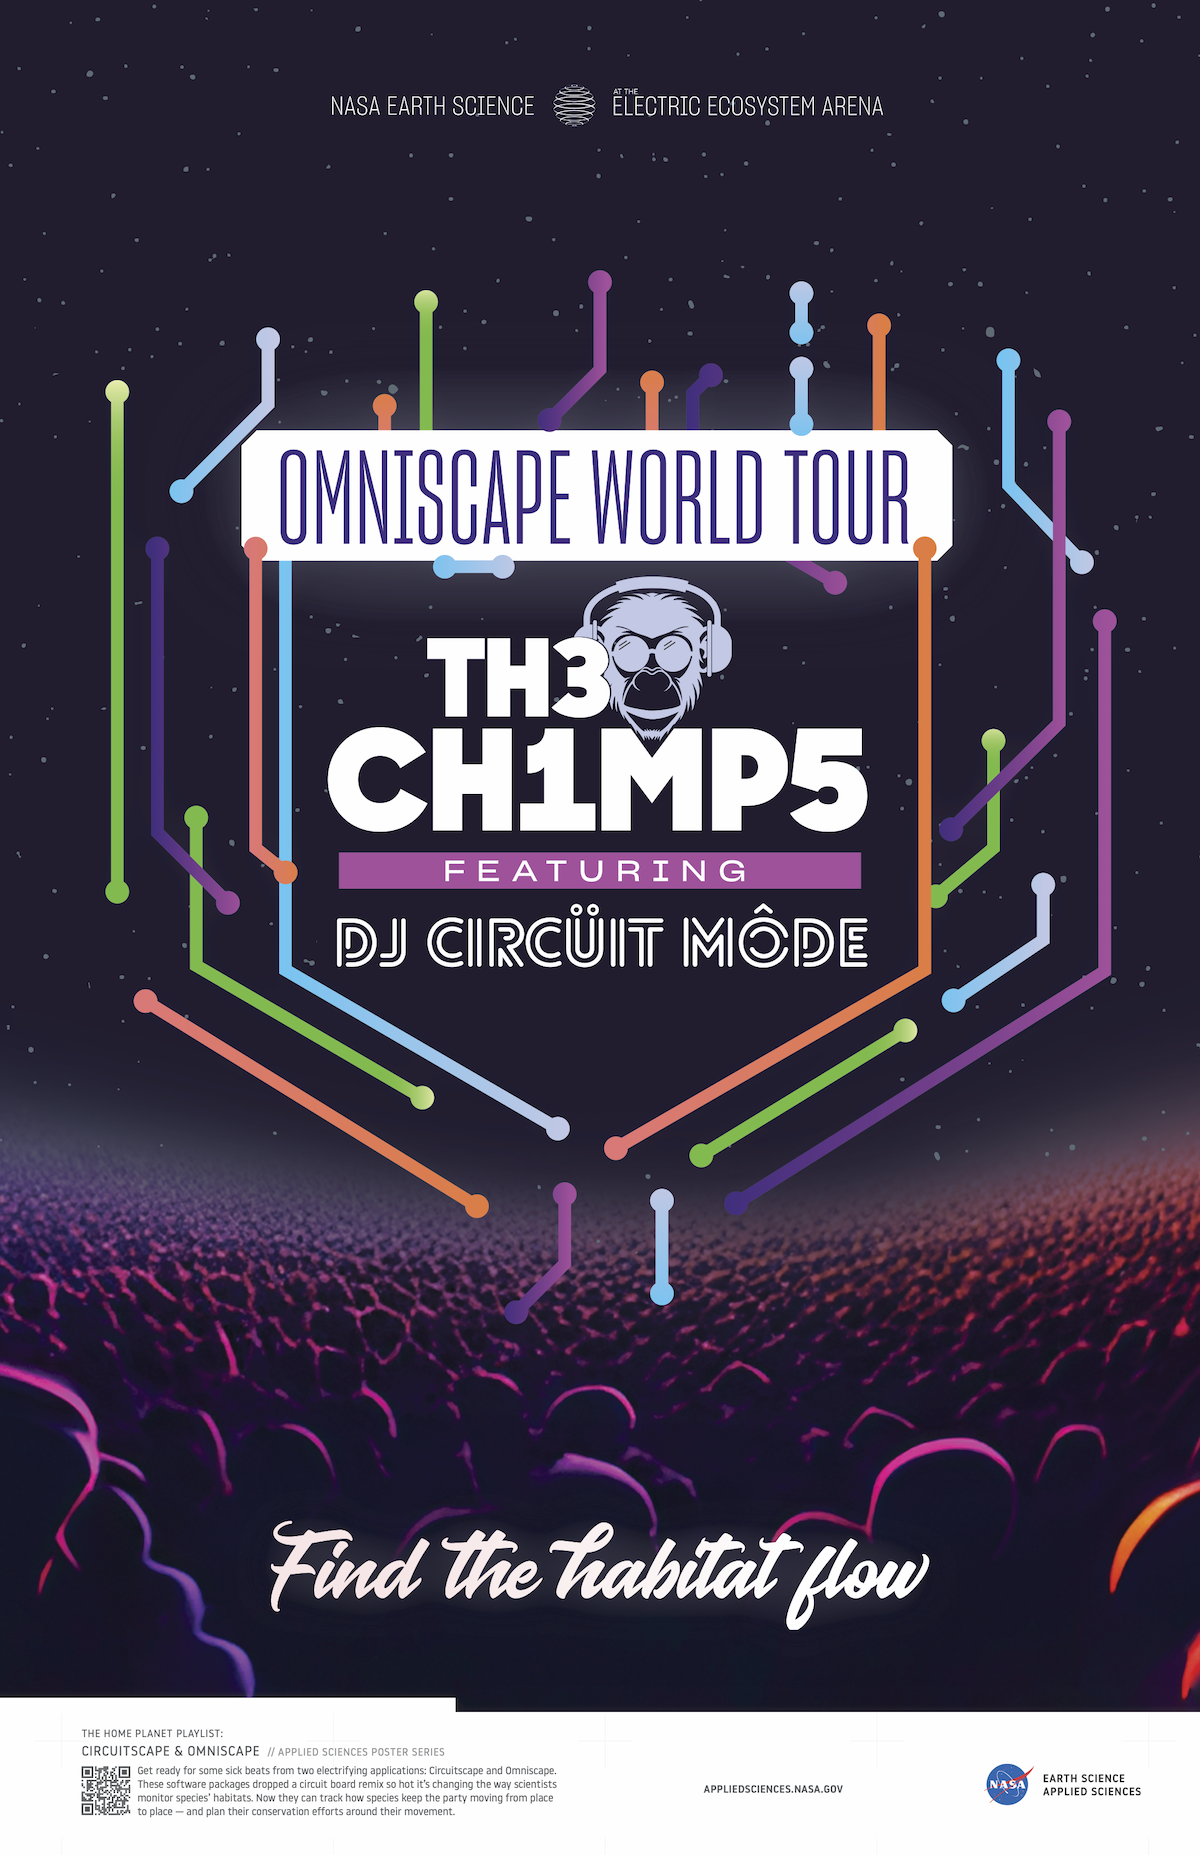 Concert poster with a starry sky and glowing crowd in the background. Centered are colorful lines that look like circuits and text styled to look like techno. Reads: Omniscape world tour, The Chimps featuring DJ Circuit Mode. Find the Habitat Flow.